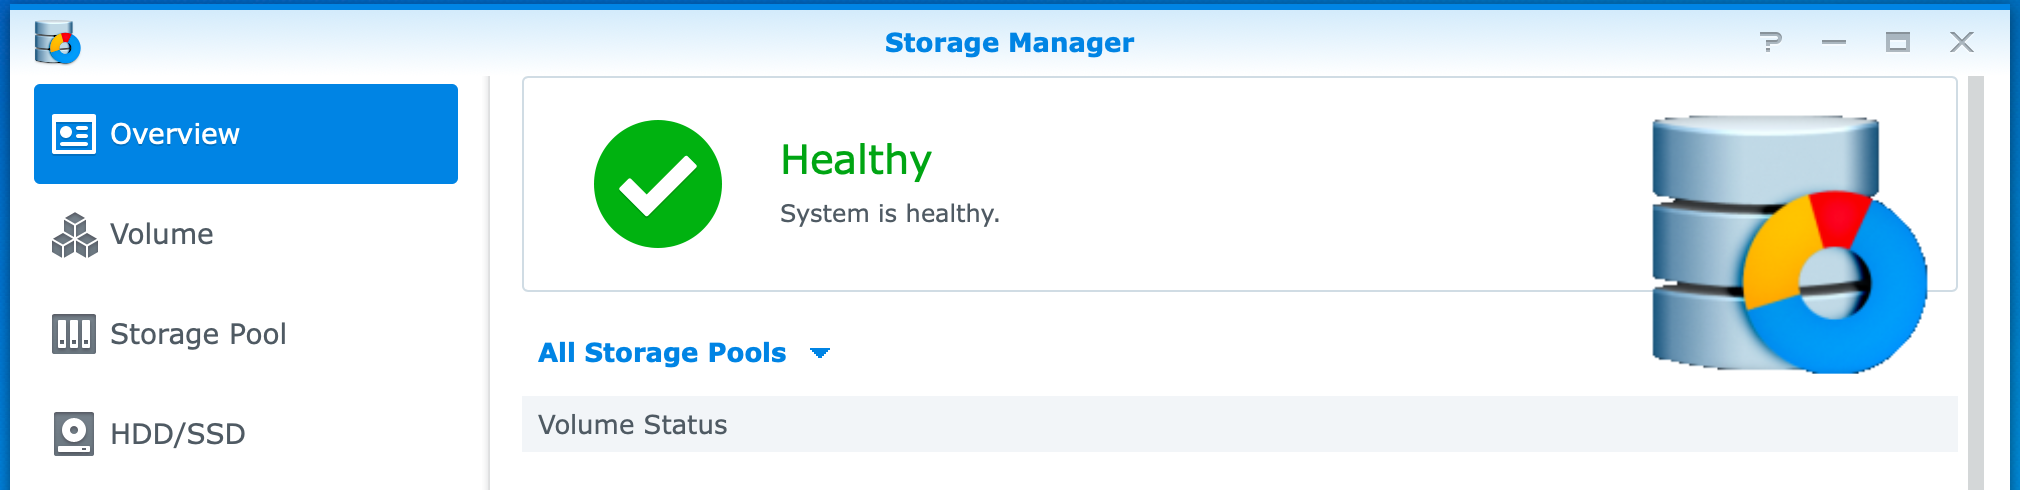 synology, storage manager, dsm6, using volumes on synology nas